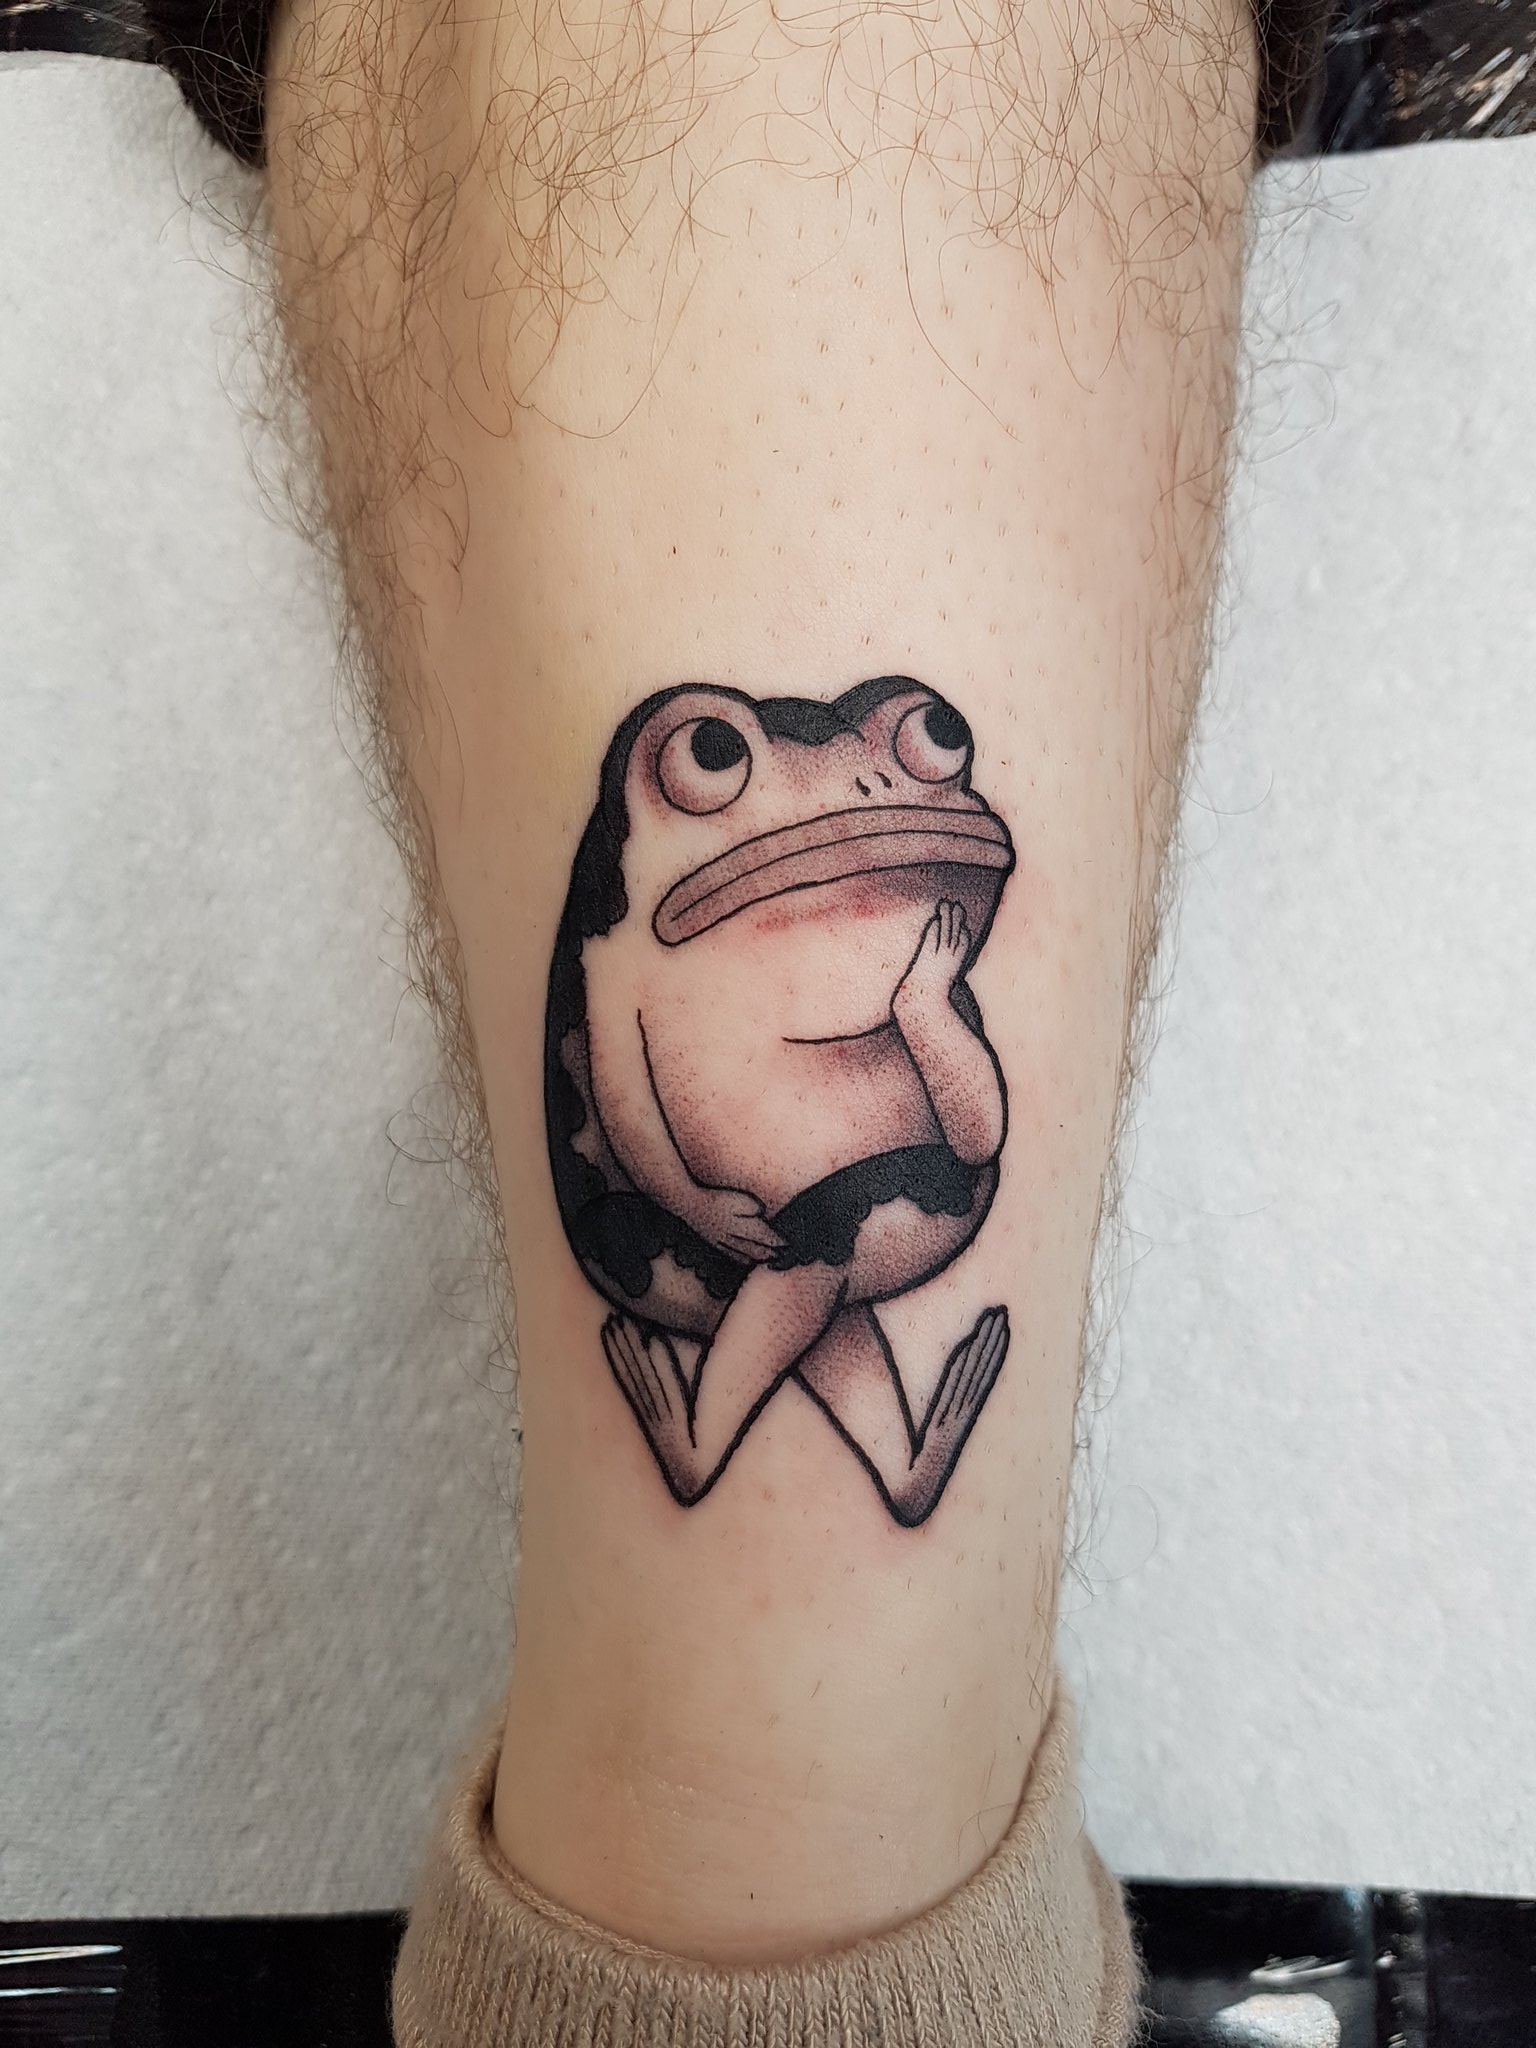 Womans Frog Tattoo Gets Mistaken For Mike From Monsters Inc Inspires 5  Other People To Share Their Frequently Misinterpreted Tattoos As Well   Bored Panda